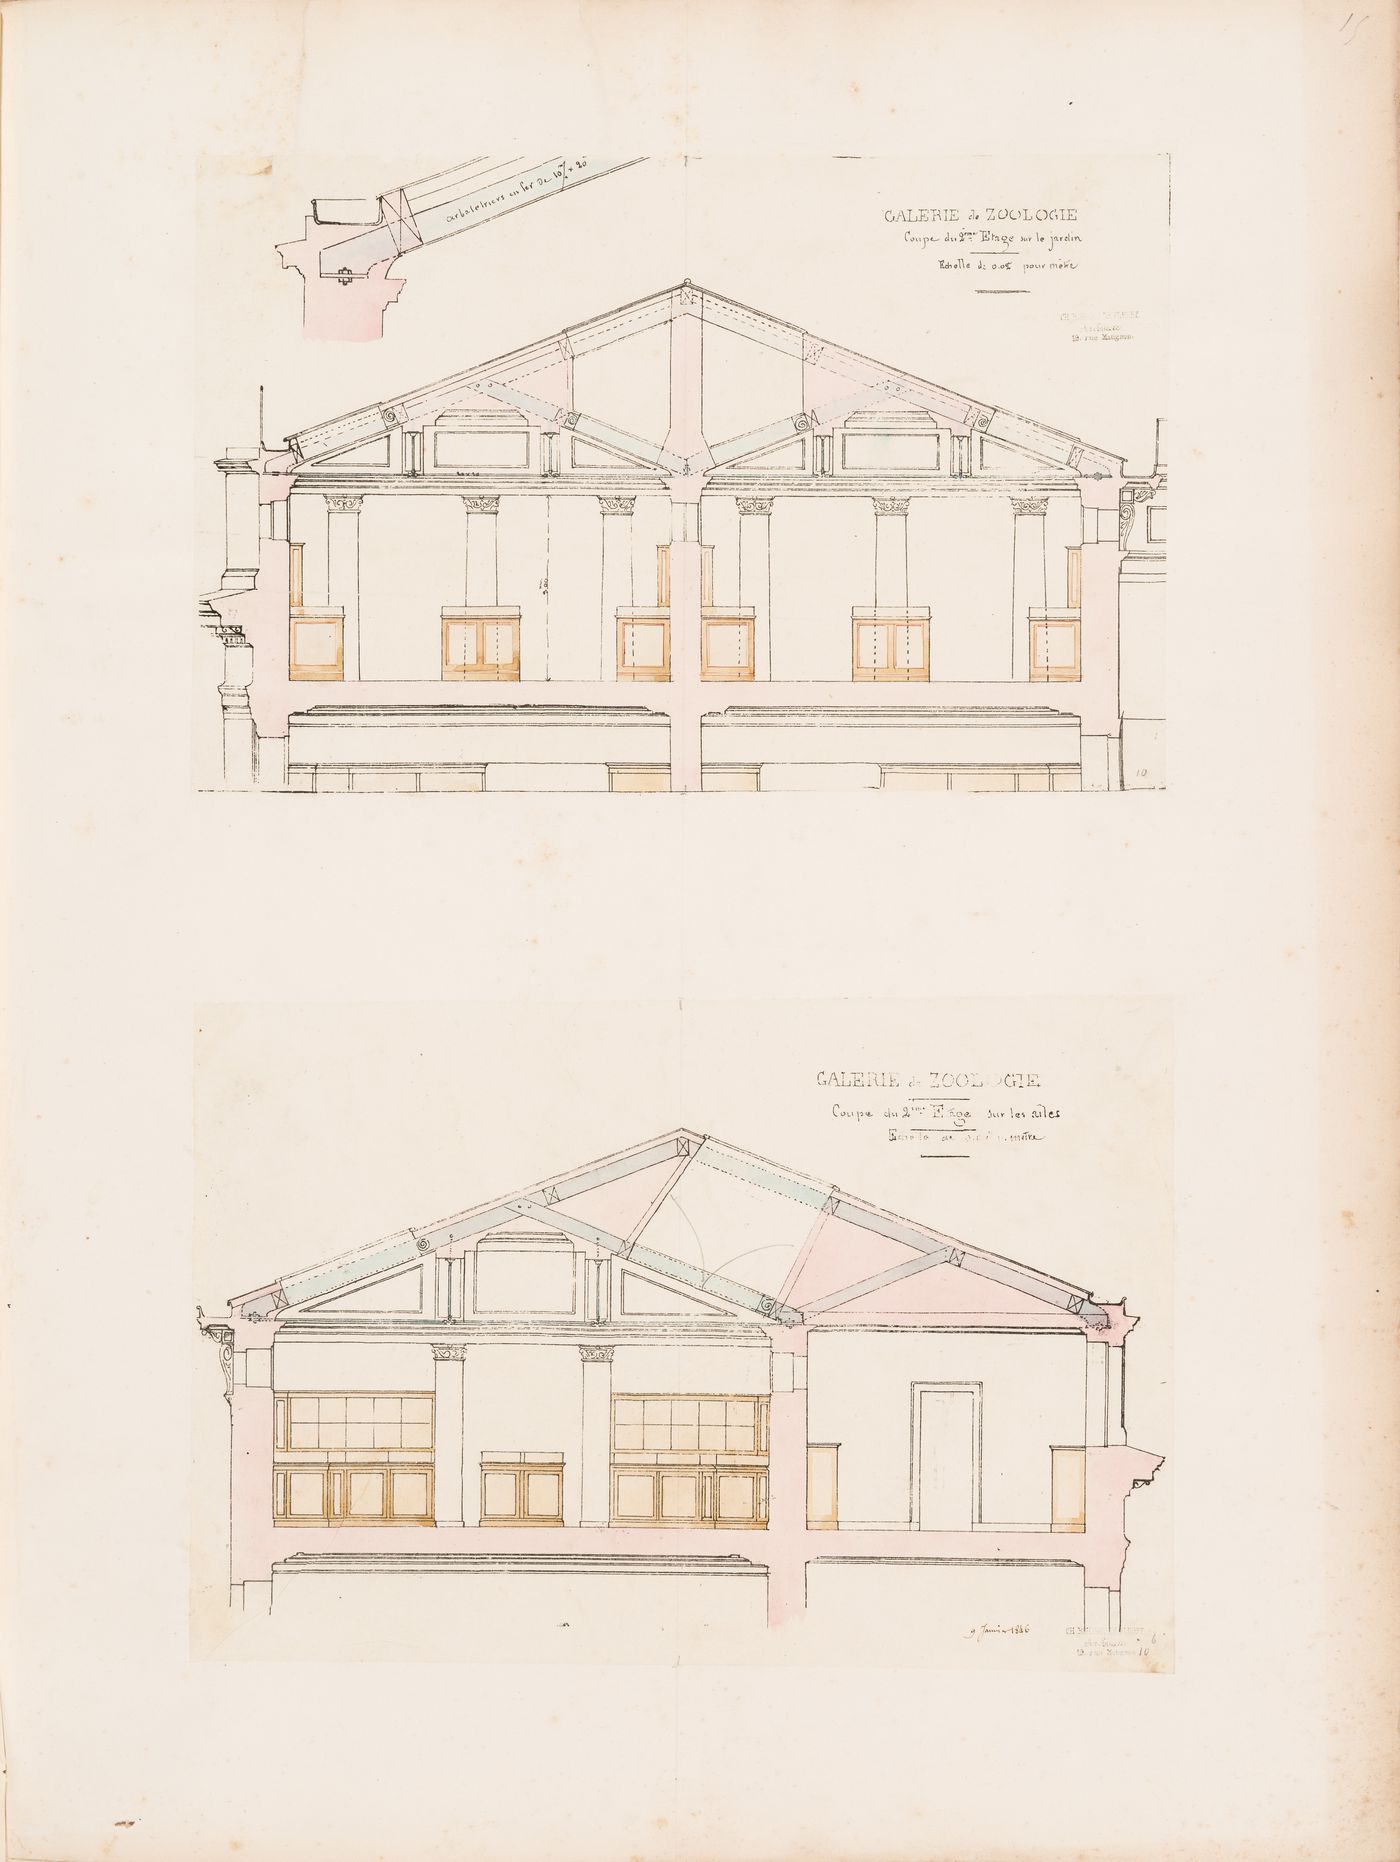 Project for a Galerie de zoologie, 1846: Cross sections for the second floor for the main and side wings